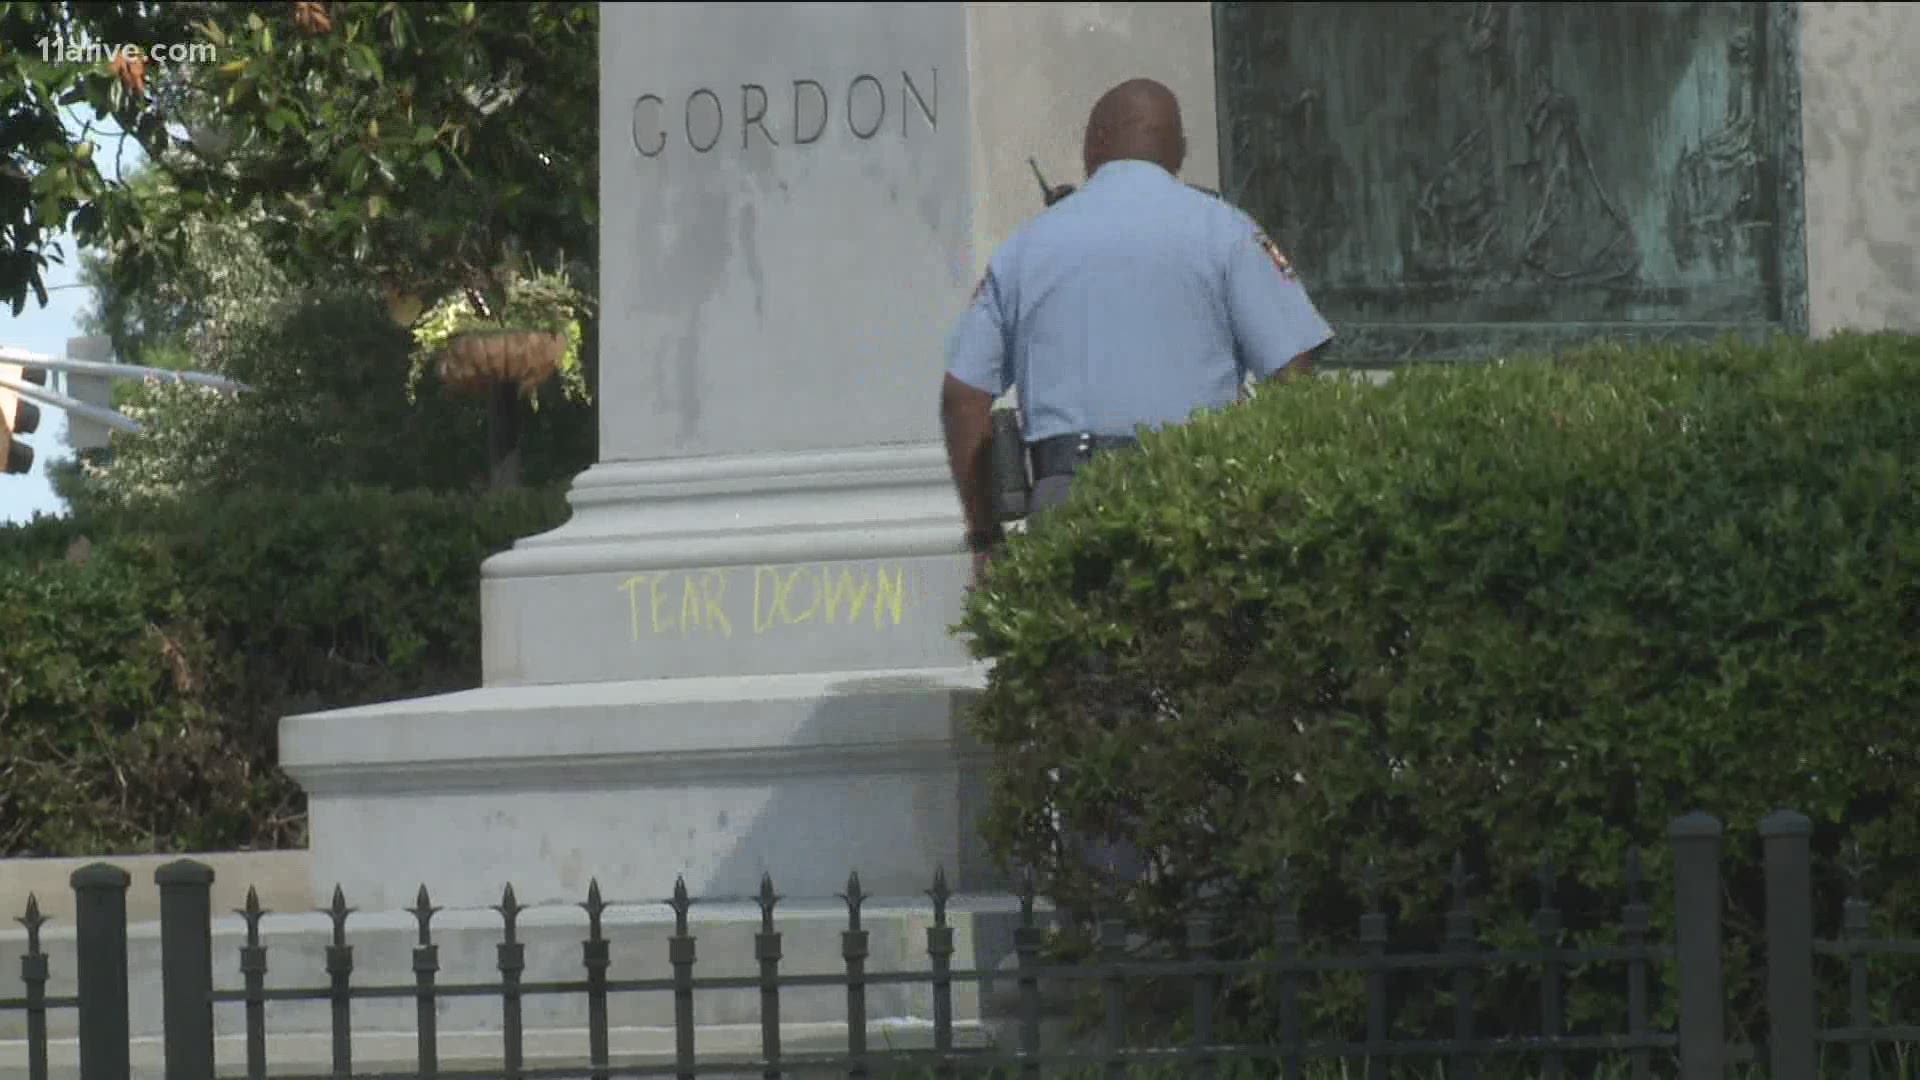 A statue of a Confederate general and one of Georgia's former governors was defaced with the words "tear down" during the sixth night of protests on the Capitol lawn